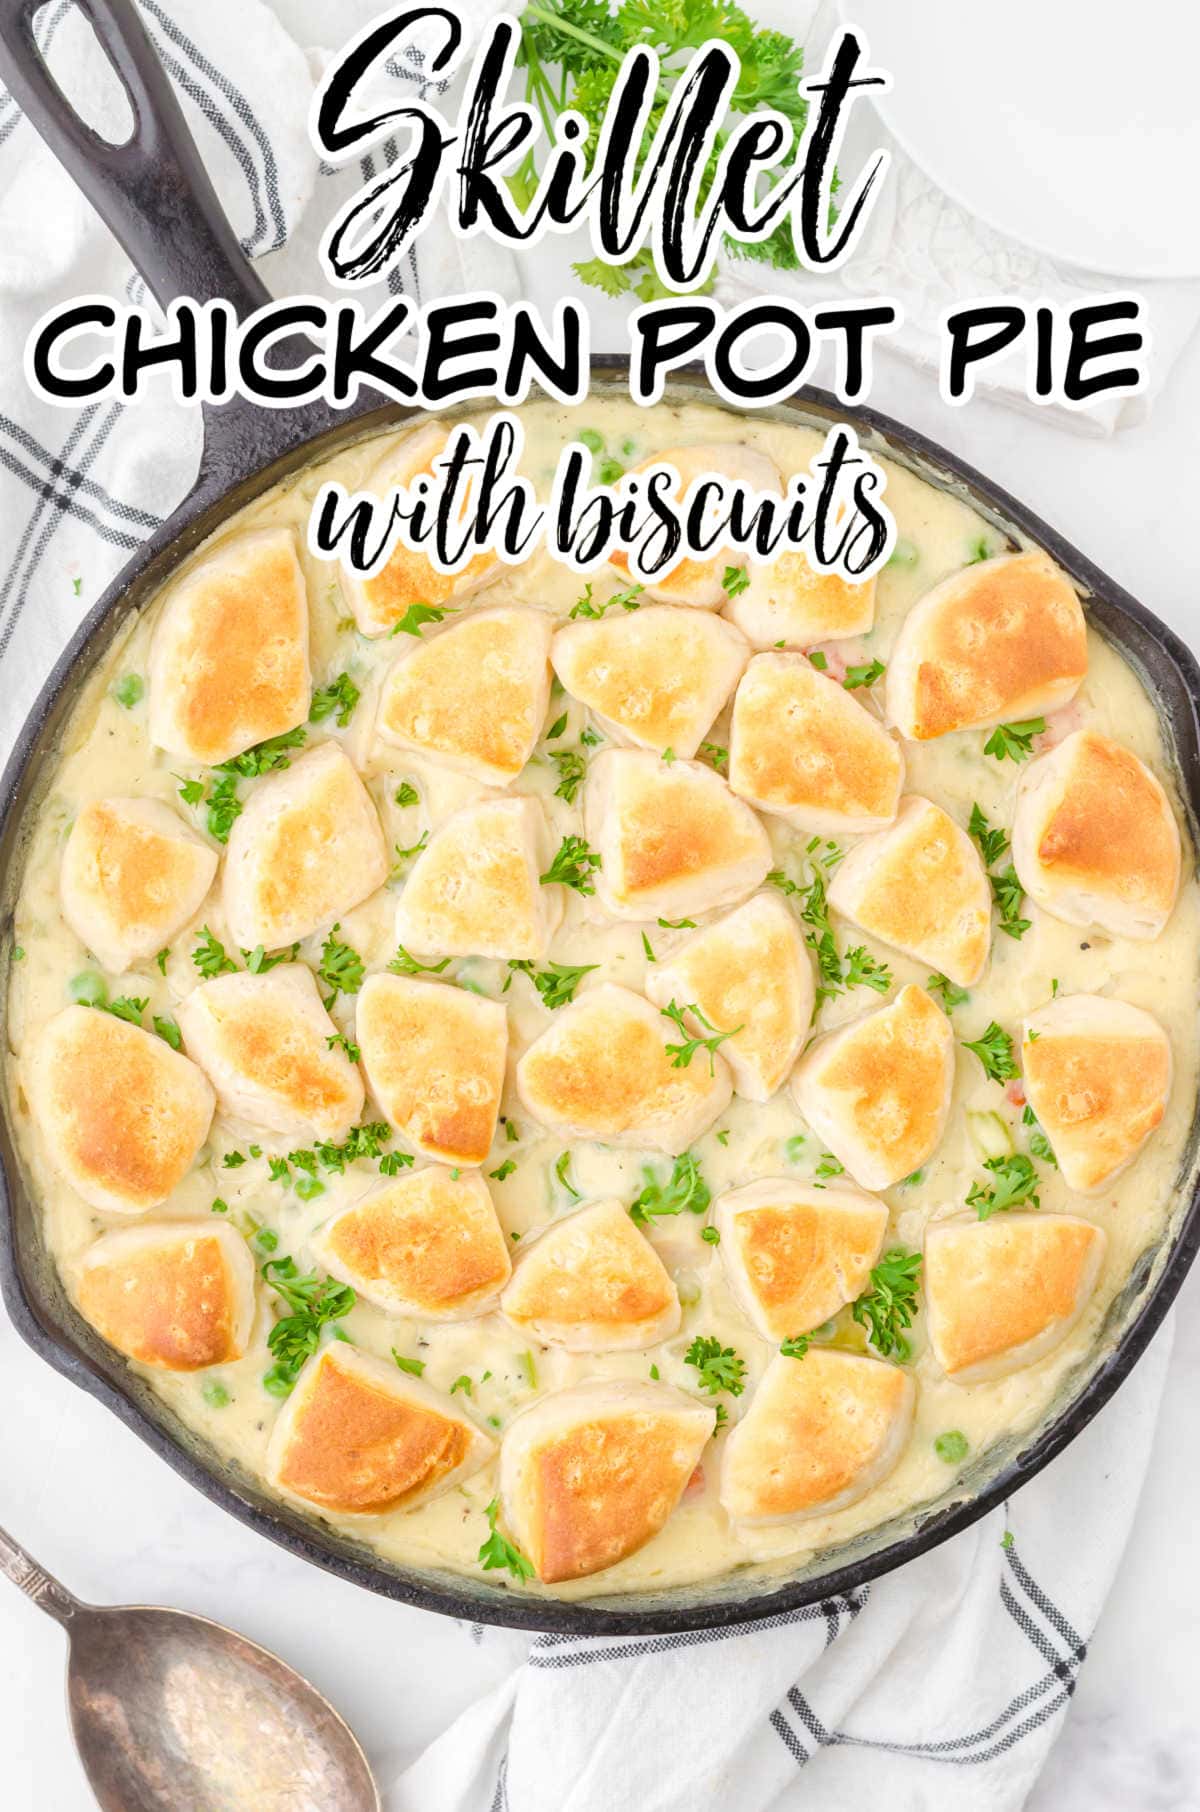 Overhead view of chicken pot pie skillet with text overlay